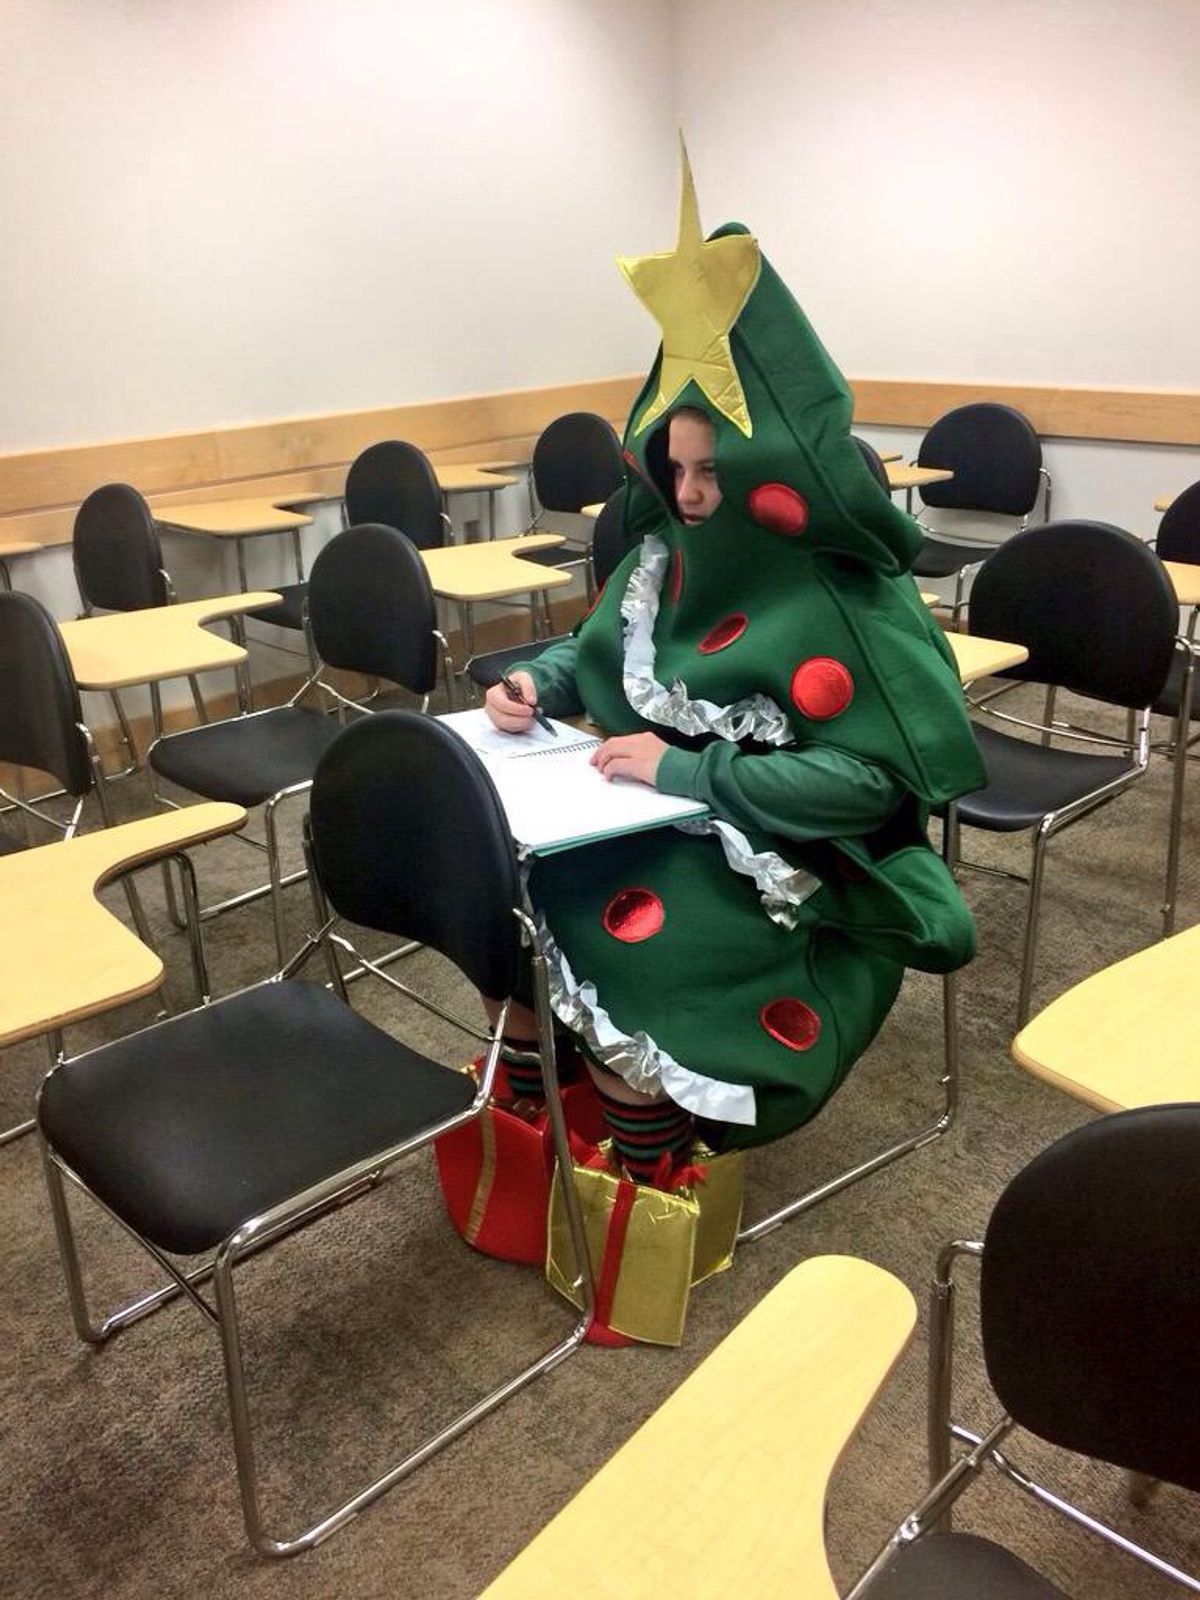 'Twas The Night Before Finals